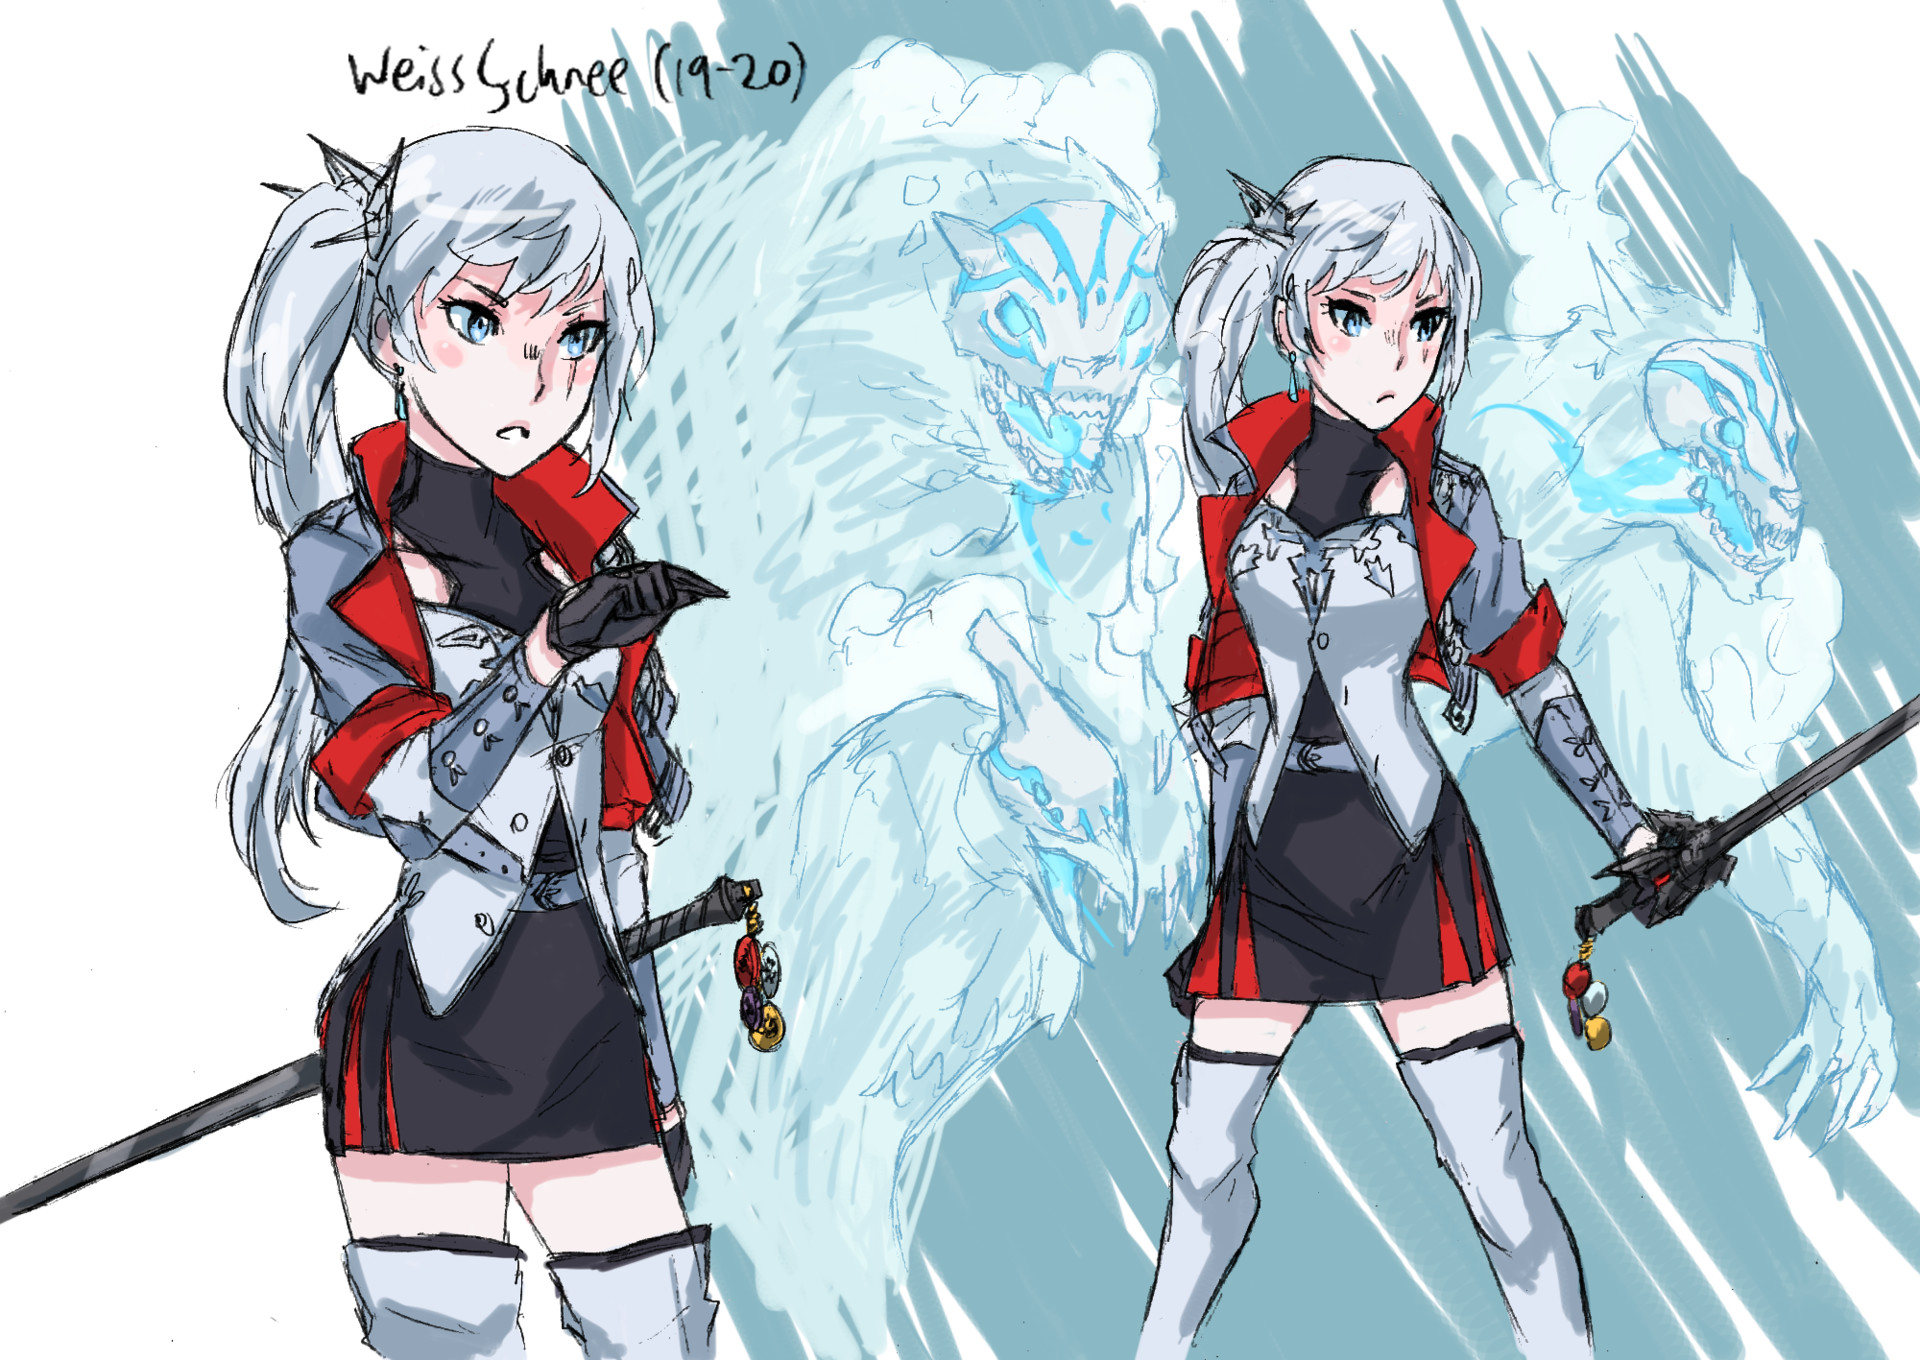 RWBY Shattered Tomorrow - Weiss Schnee.